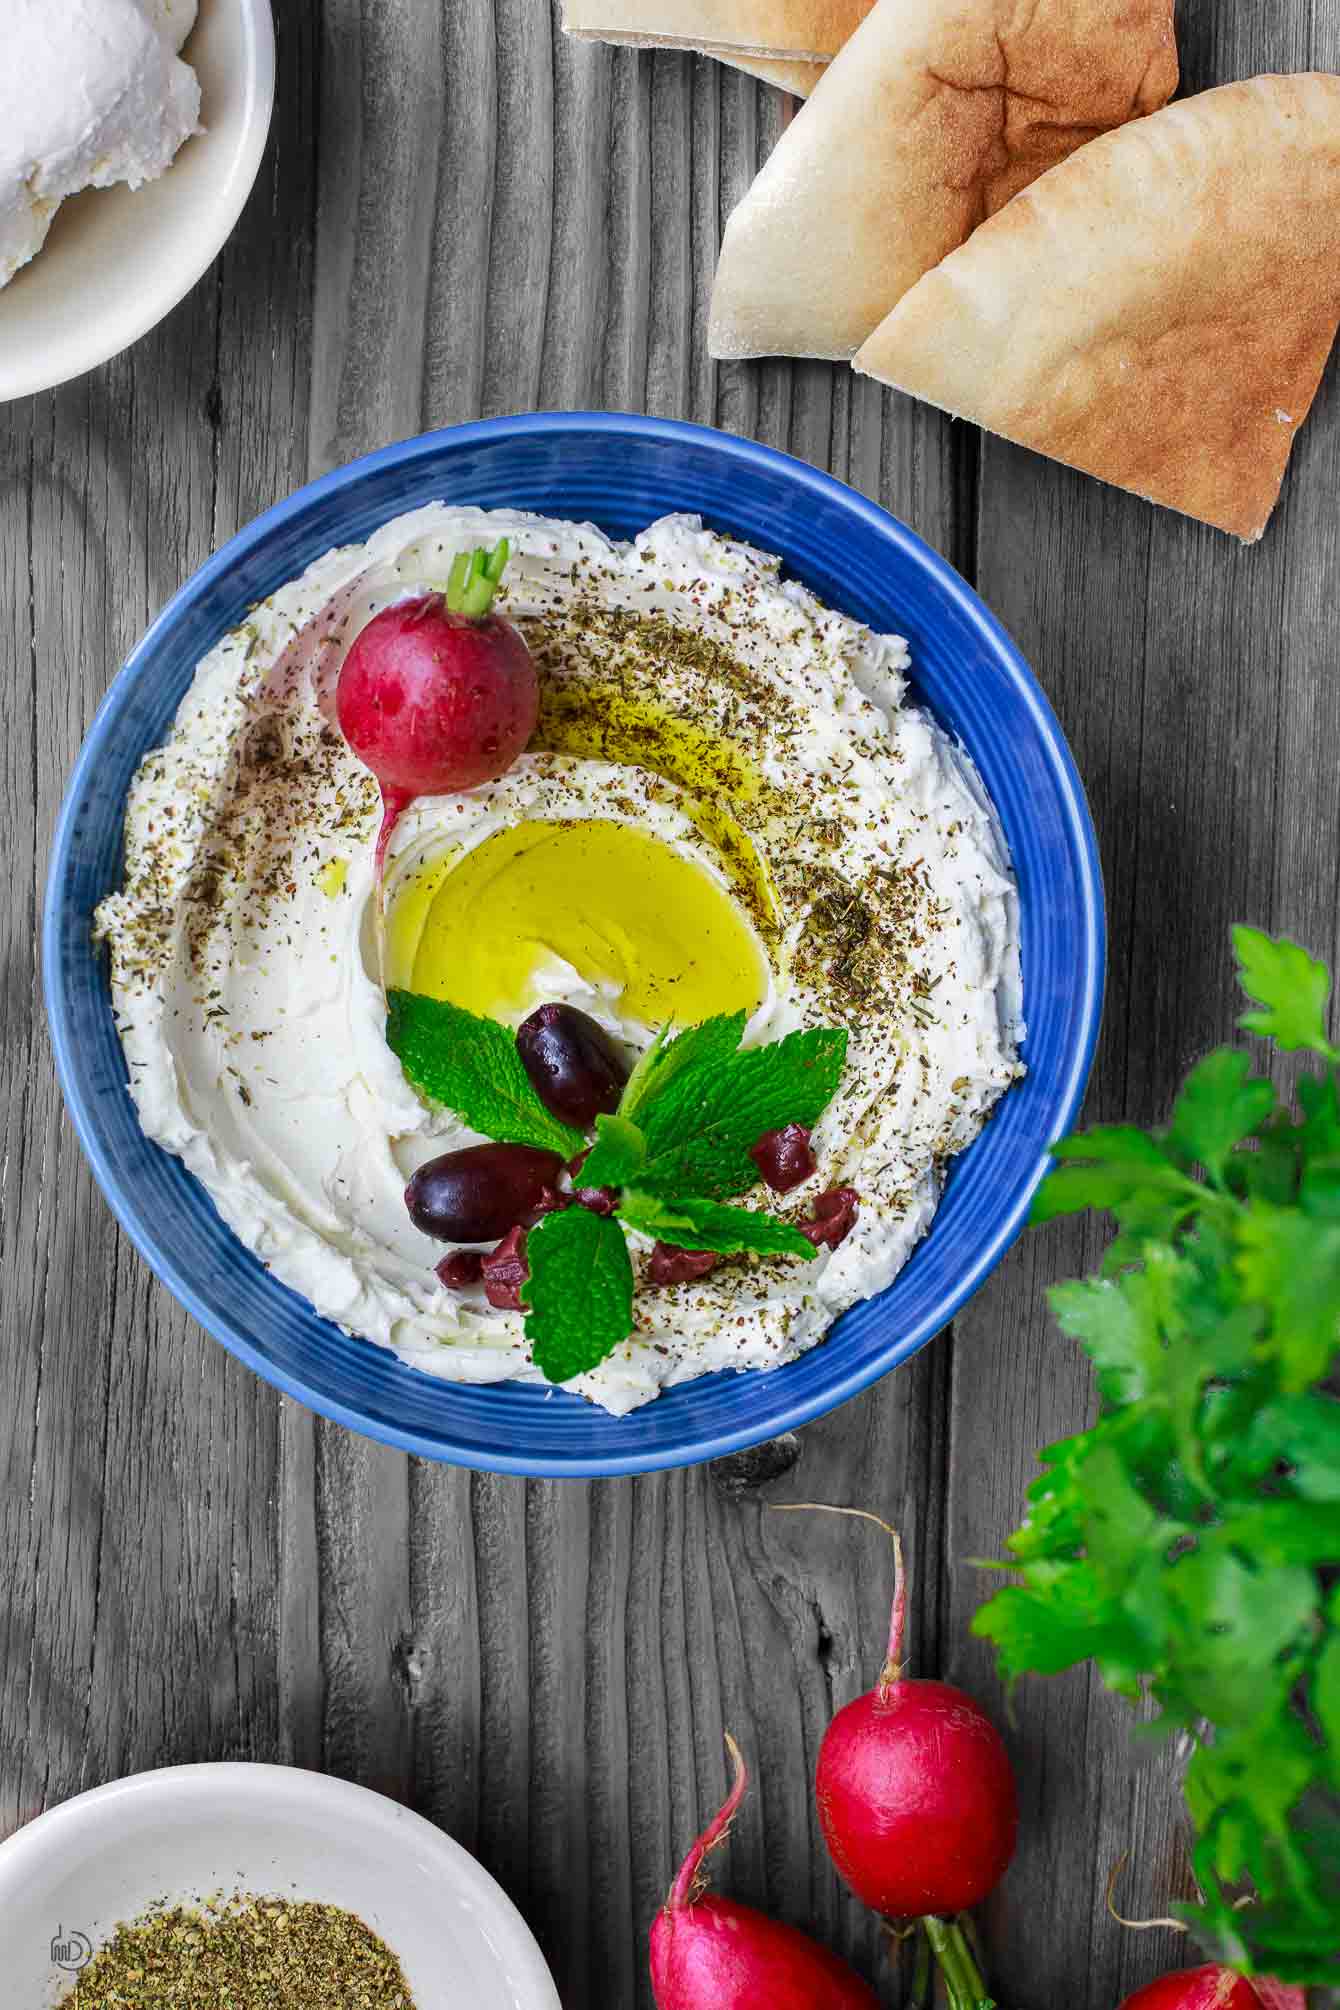 Homemade Labneh Recipe (Video: How to Make Labneh) | The Mediterranean Dish